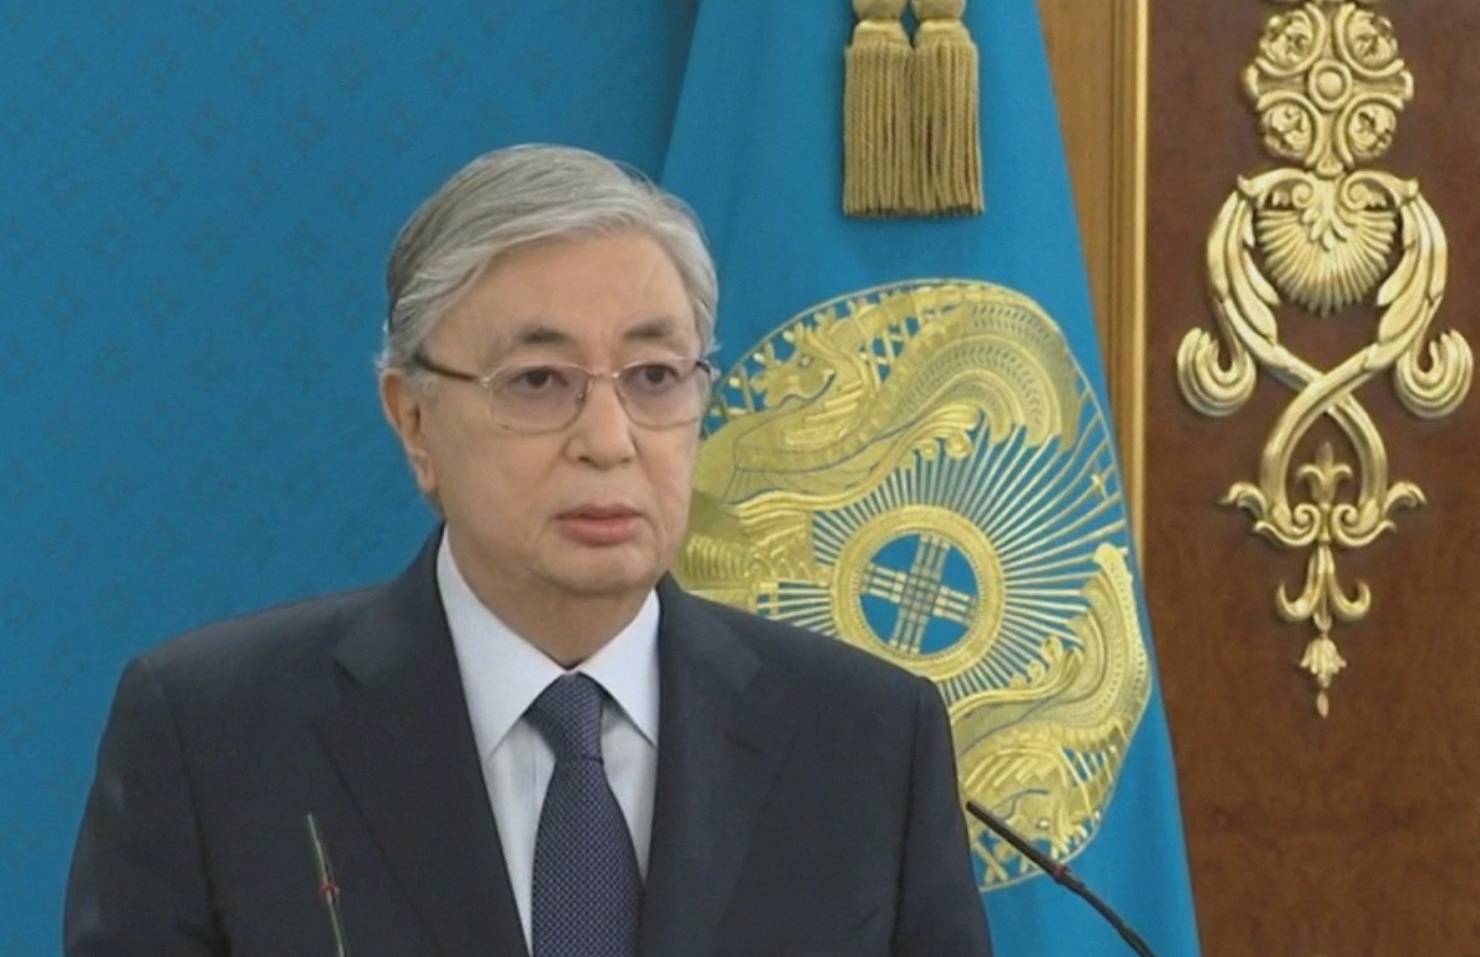 Kazakh President Kassym-Jomart Tokayev speaks during a televised address to the nation following protests triggered by a fuel price increase in Nur-Sultan, Kazakhstan on Jan. 7. | REUTERS 